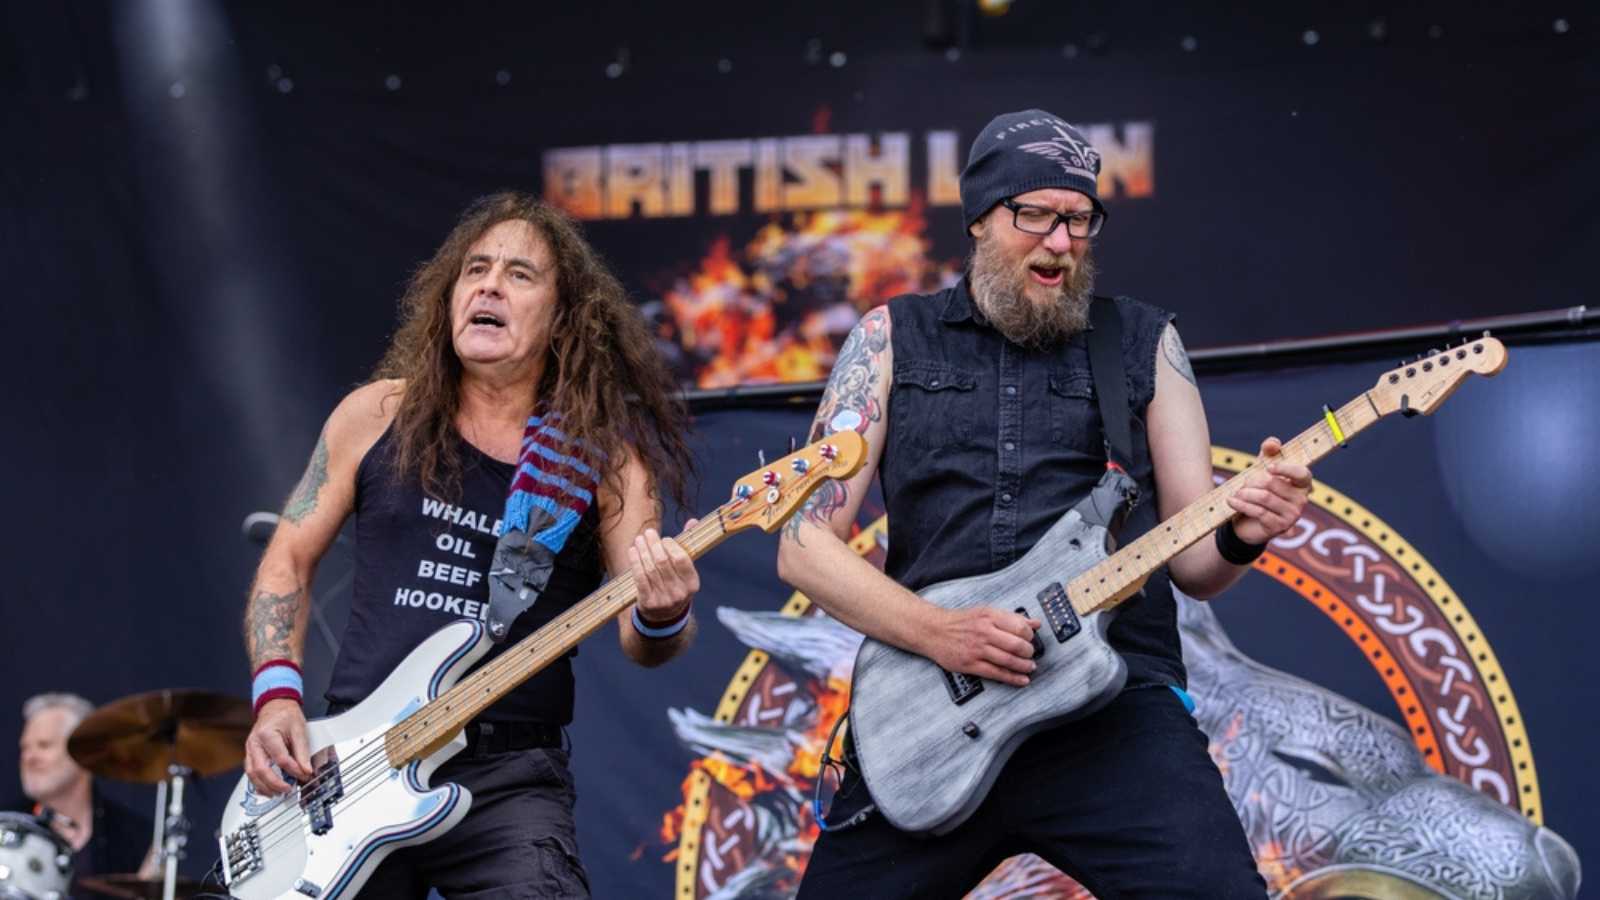 HYVINKAA, FINLAND – JUNE 3 2022: Steve Harris of Iron Maiden performing with British Lion at Rockfest music festival